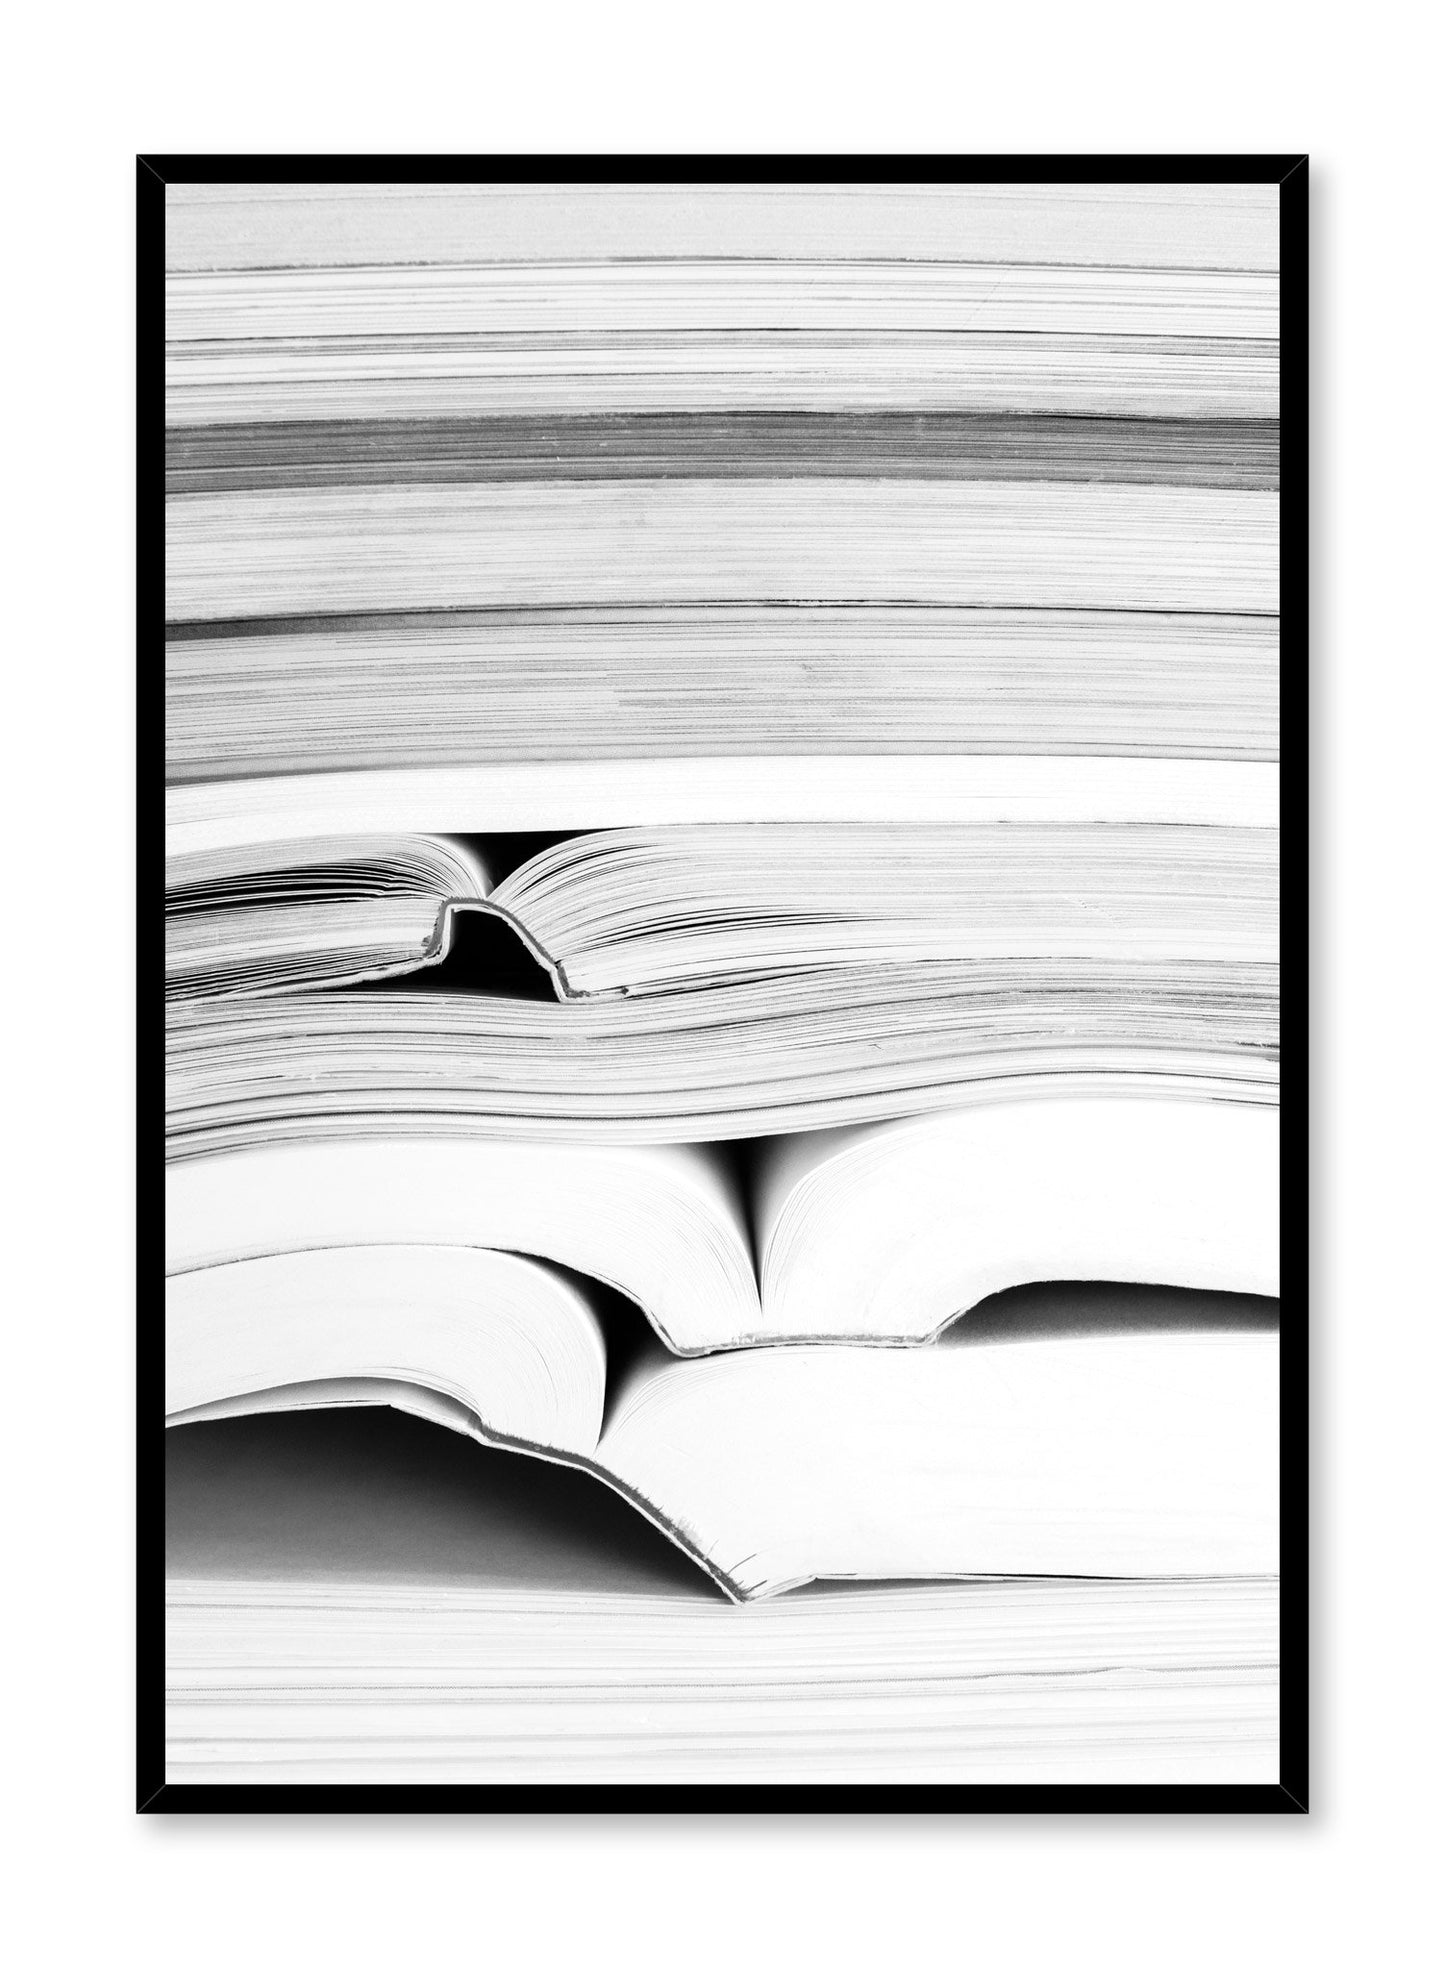 Modern minimalist photography with black and white close-up of books